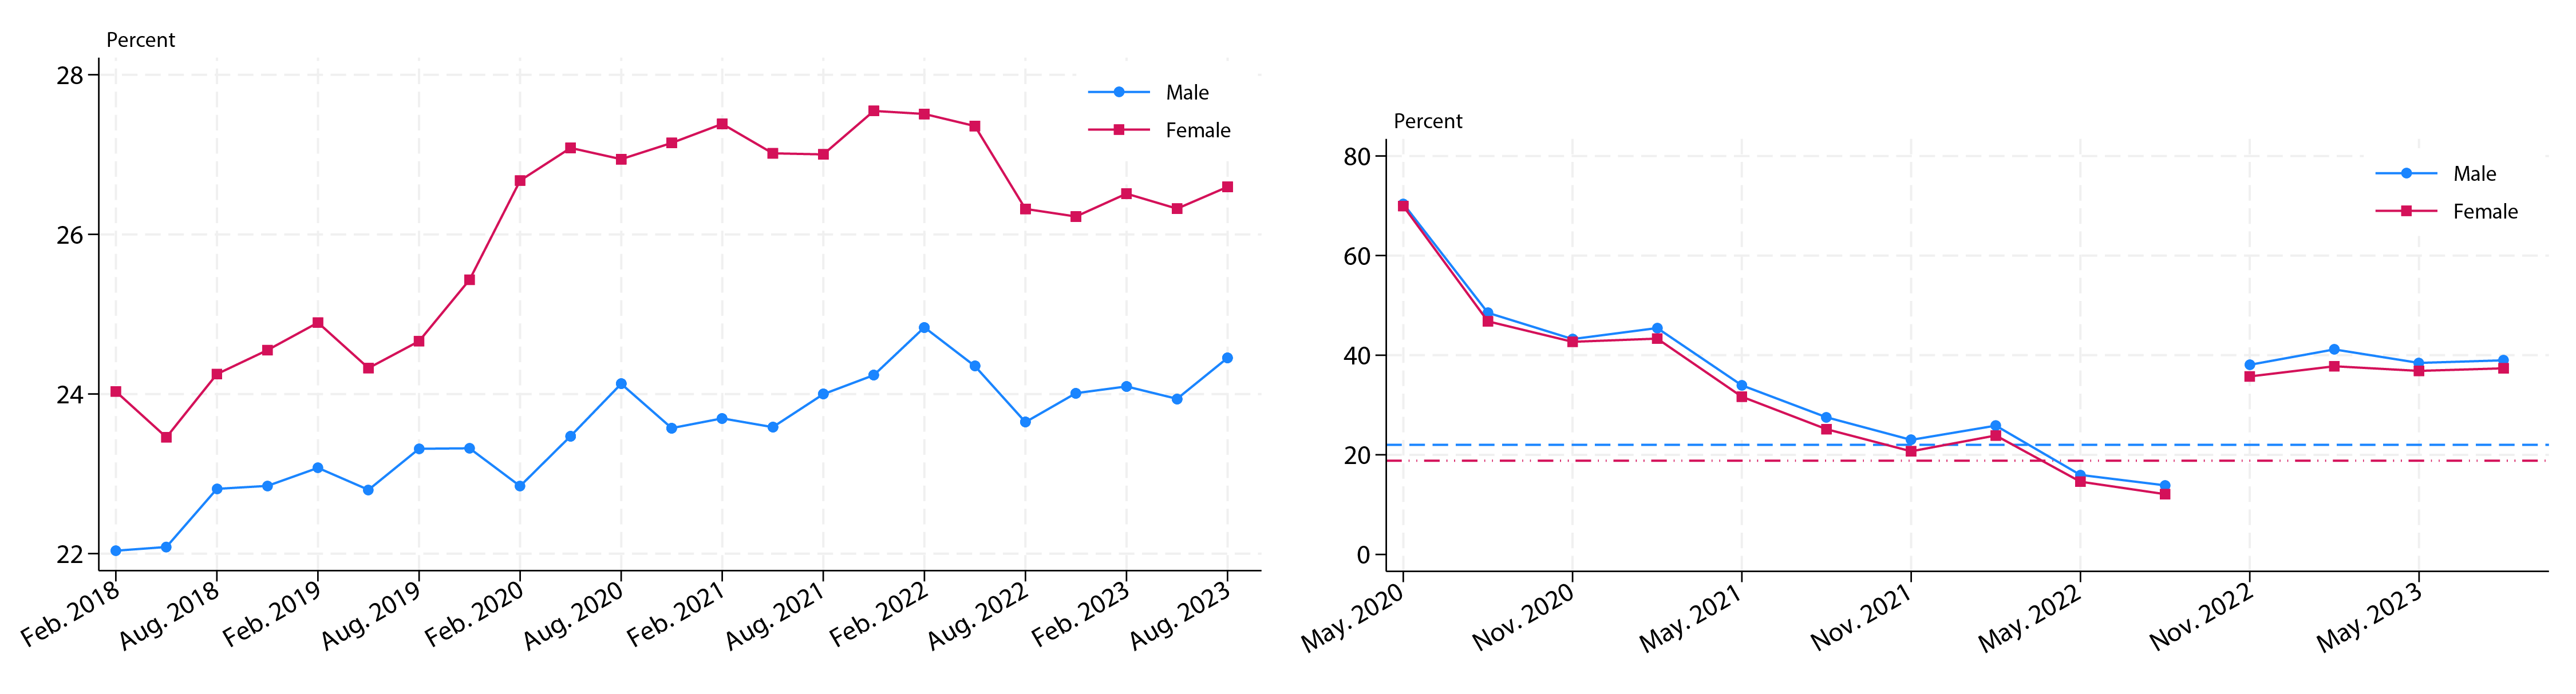 Figure 3. Remote Ability and Remote Utilization by Gender. See accessible link for data.